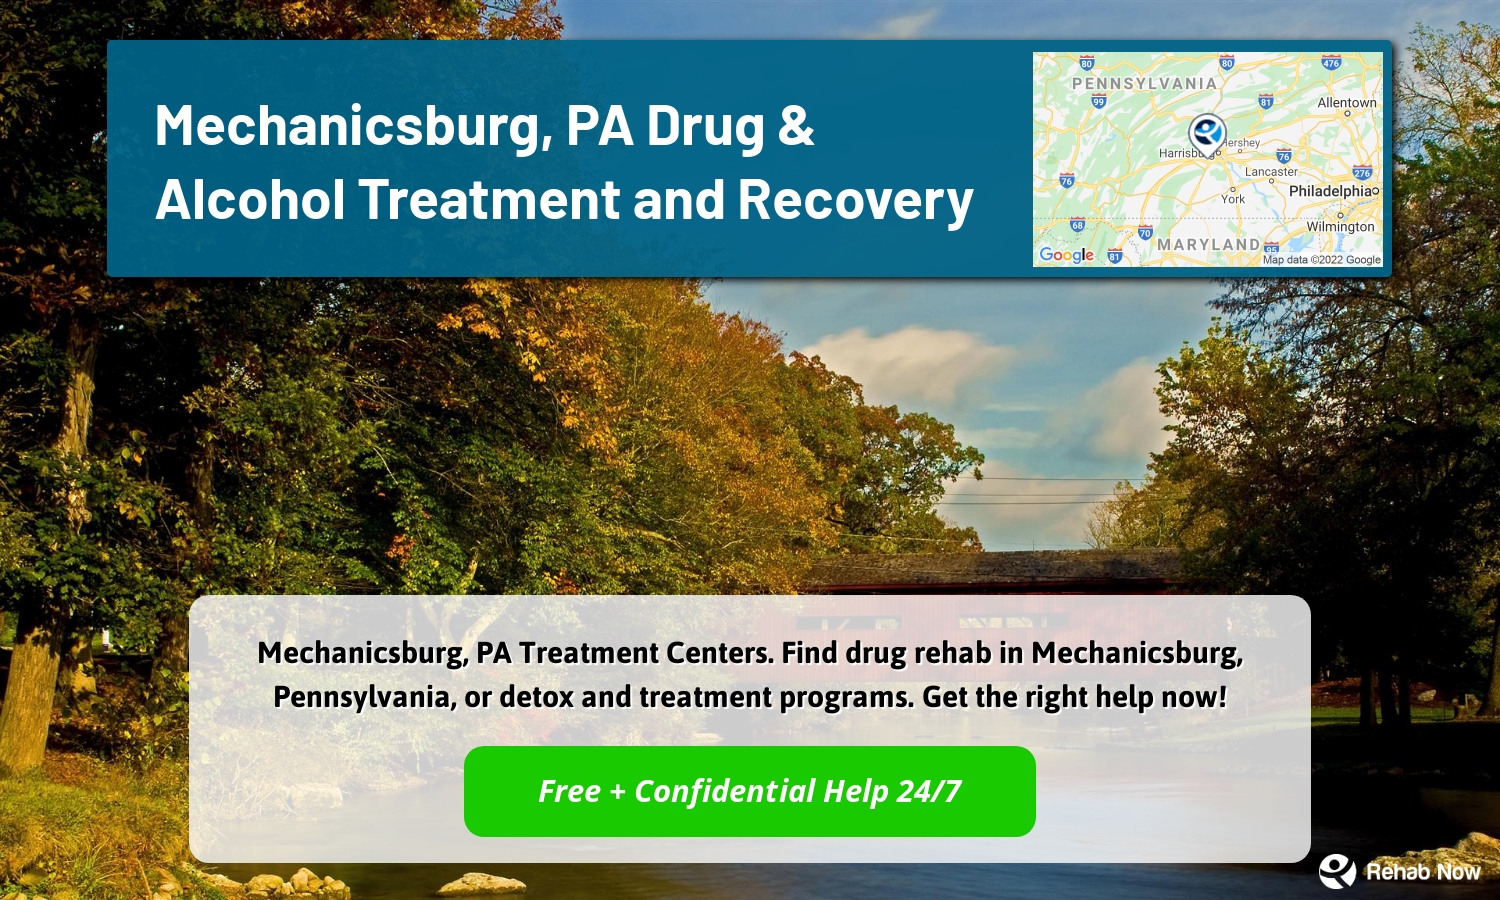 Mechanicsburg, PA Treatment Centers. Find drug rehab in Mechanicsburg, Pennsylvania, or detox and treatment programs. Get the right help now!